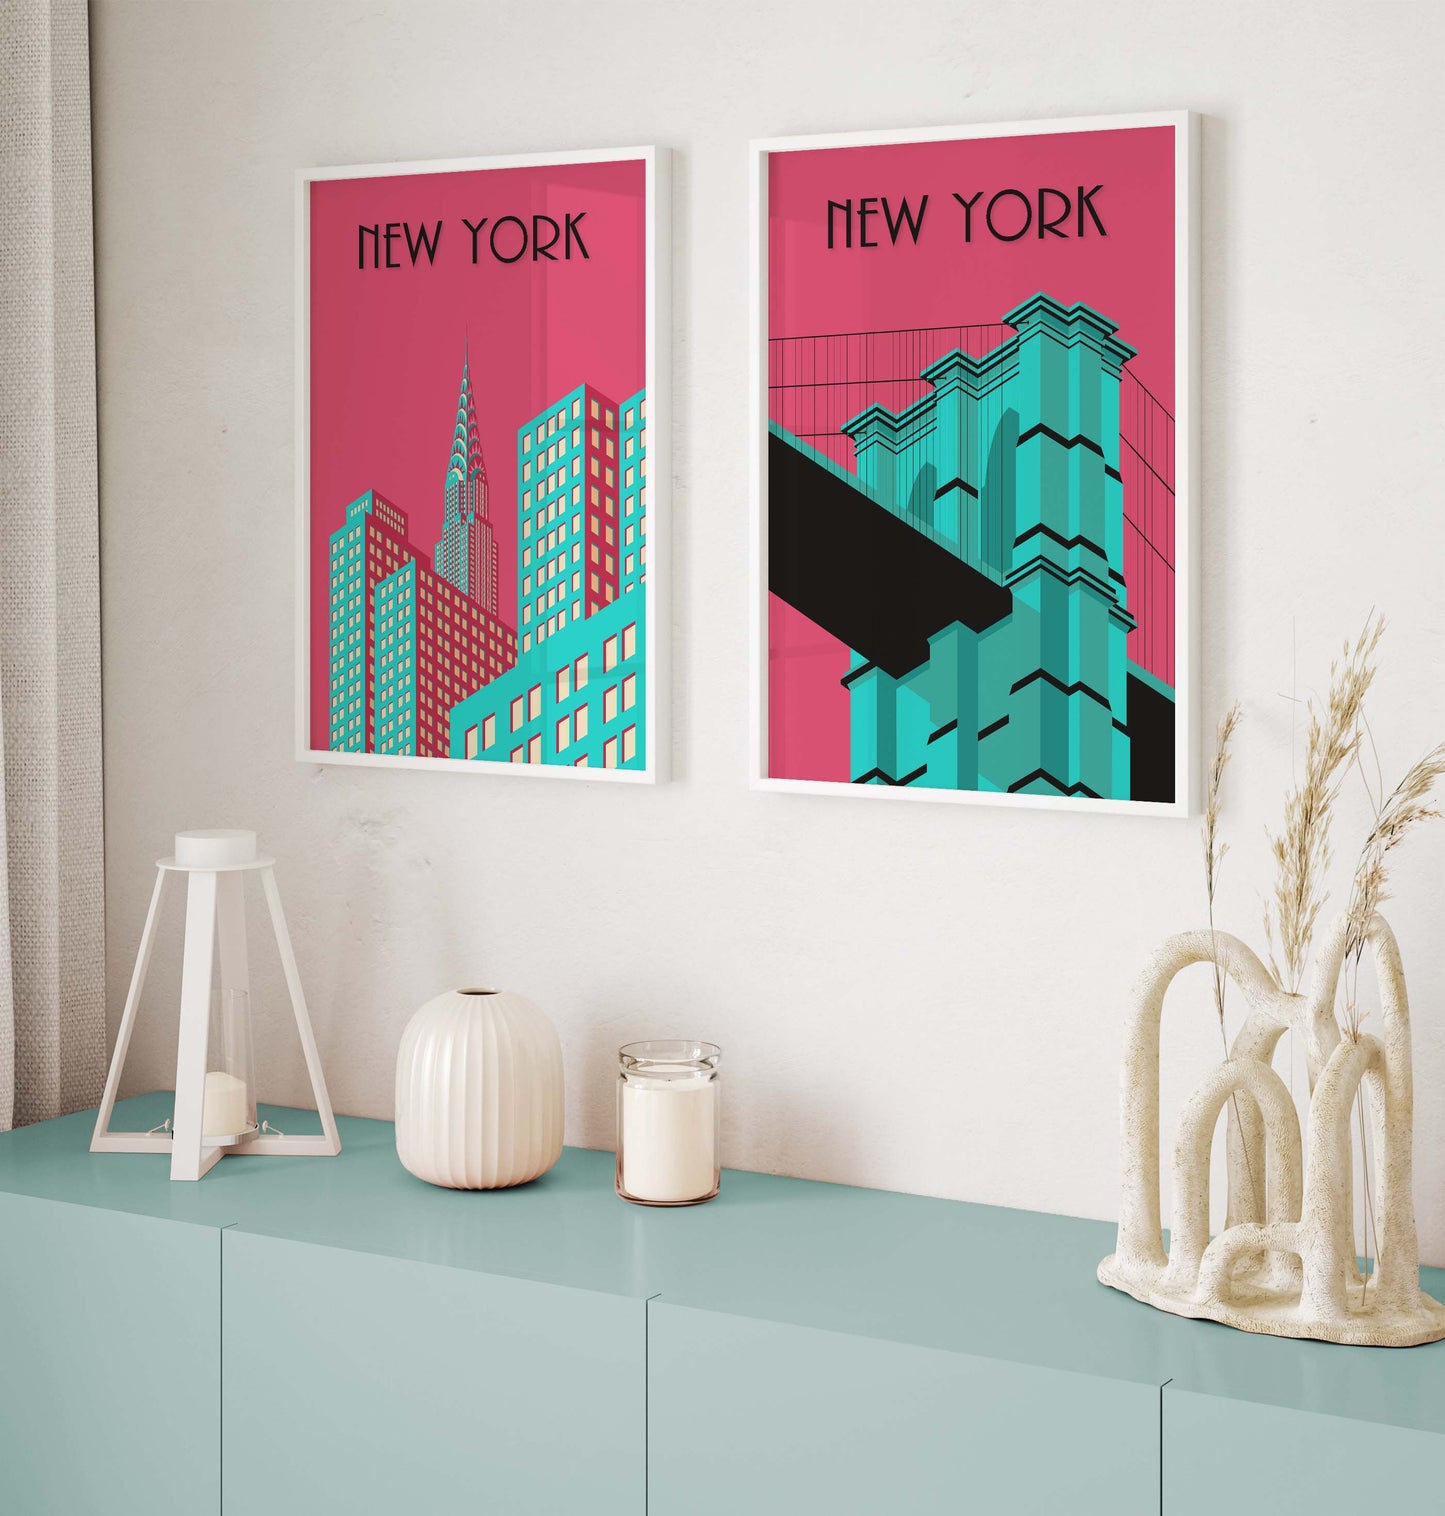 Set of 2 New York posters in pink and blue. Showing Brooklyn Bridge and the Chrysler Building